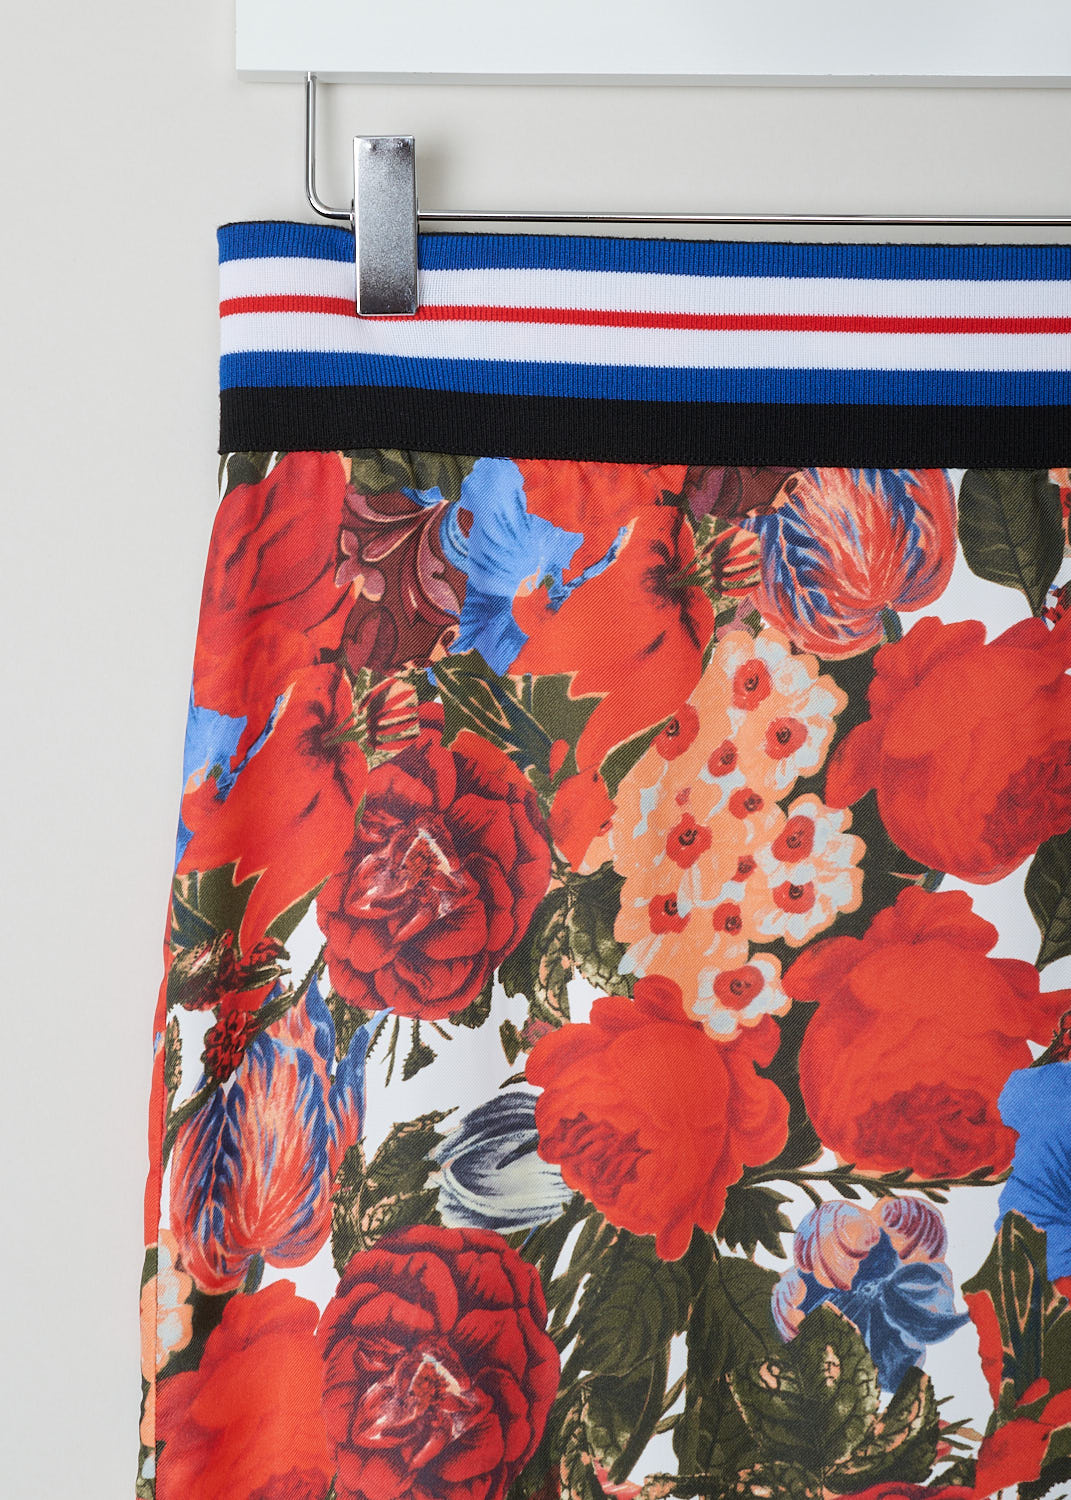 MARNI, PENCIL SKIRT ADORNED WITH A RED FLORAL MOTIF, GOMAP26LO0_TV677_DUR66, Red, Print, Detail, This pencil skirt comes decorated with a cheerful floral print in reds and blues. Made with a broad elastic waistband for maximum comfort. The fastening option here comes in the form of a concealed zipper and is found on the back. Also found on the back is the split, going up a third of the way. 